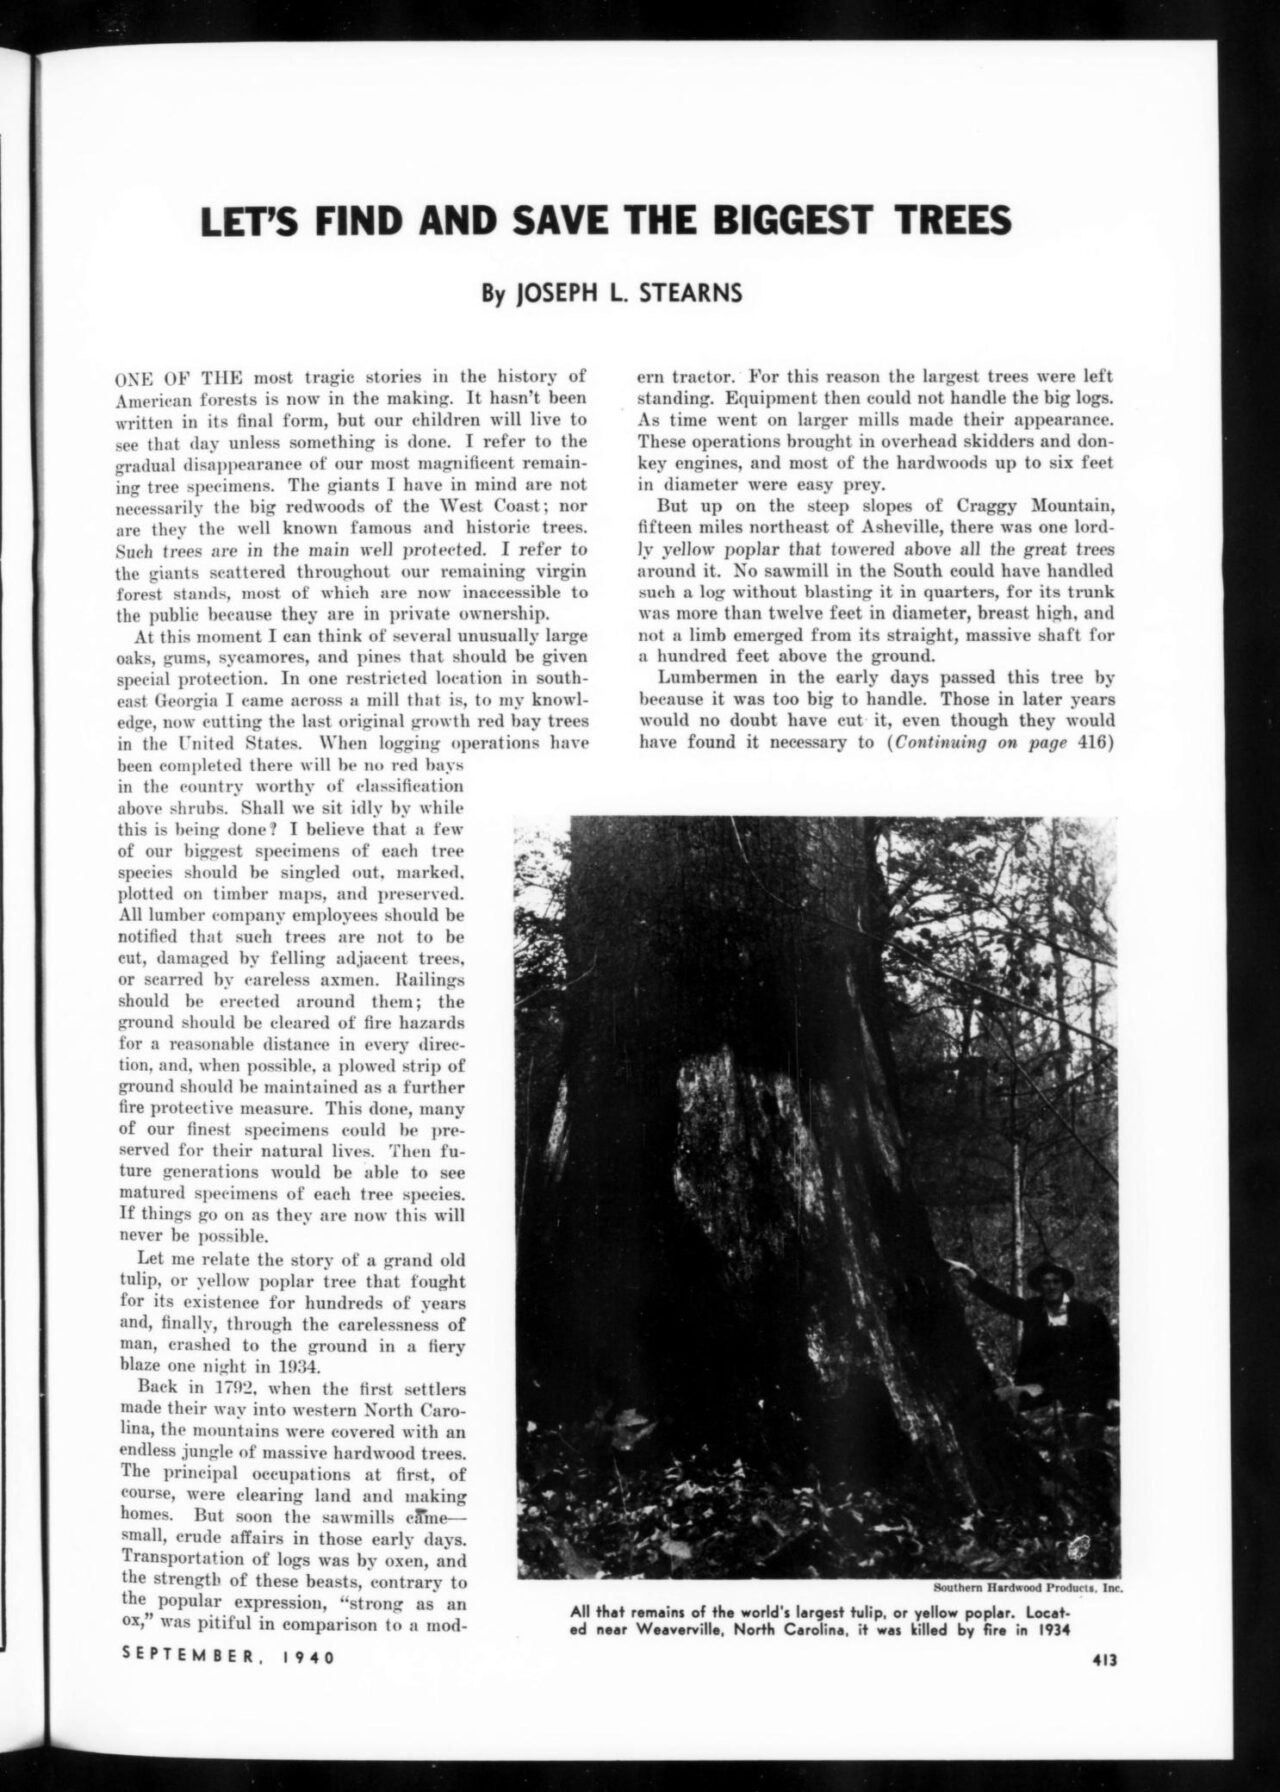 In 1940, the National Champion Tree Program was launched in American Forests magazine by noting: “Such a conservation activity, it is believed, will have incalculable benefits, not only in stimulating greater tree appreciation, but in establishing a nation-wide laboratory for tree and forestry studies by future generations.”